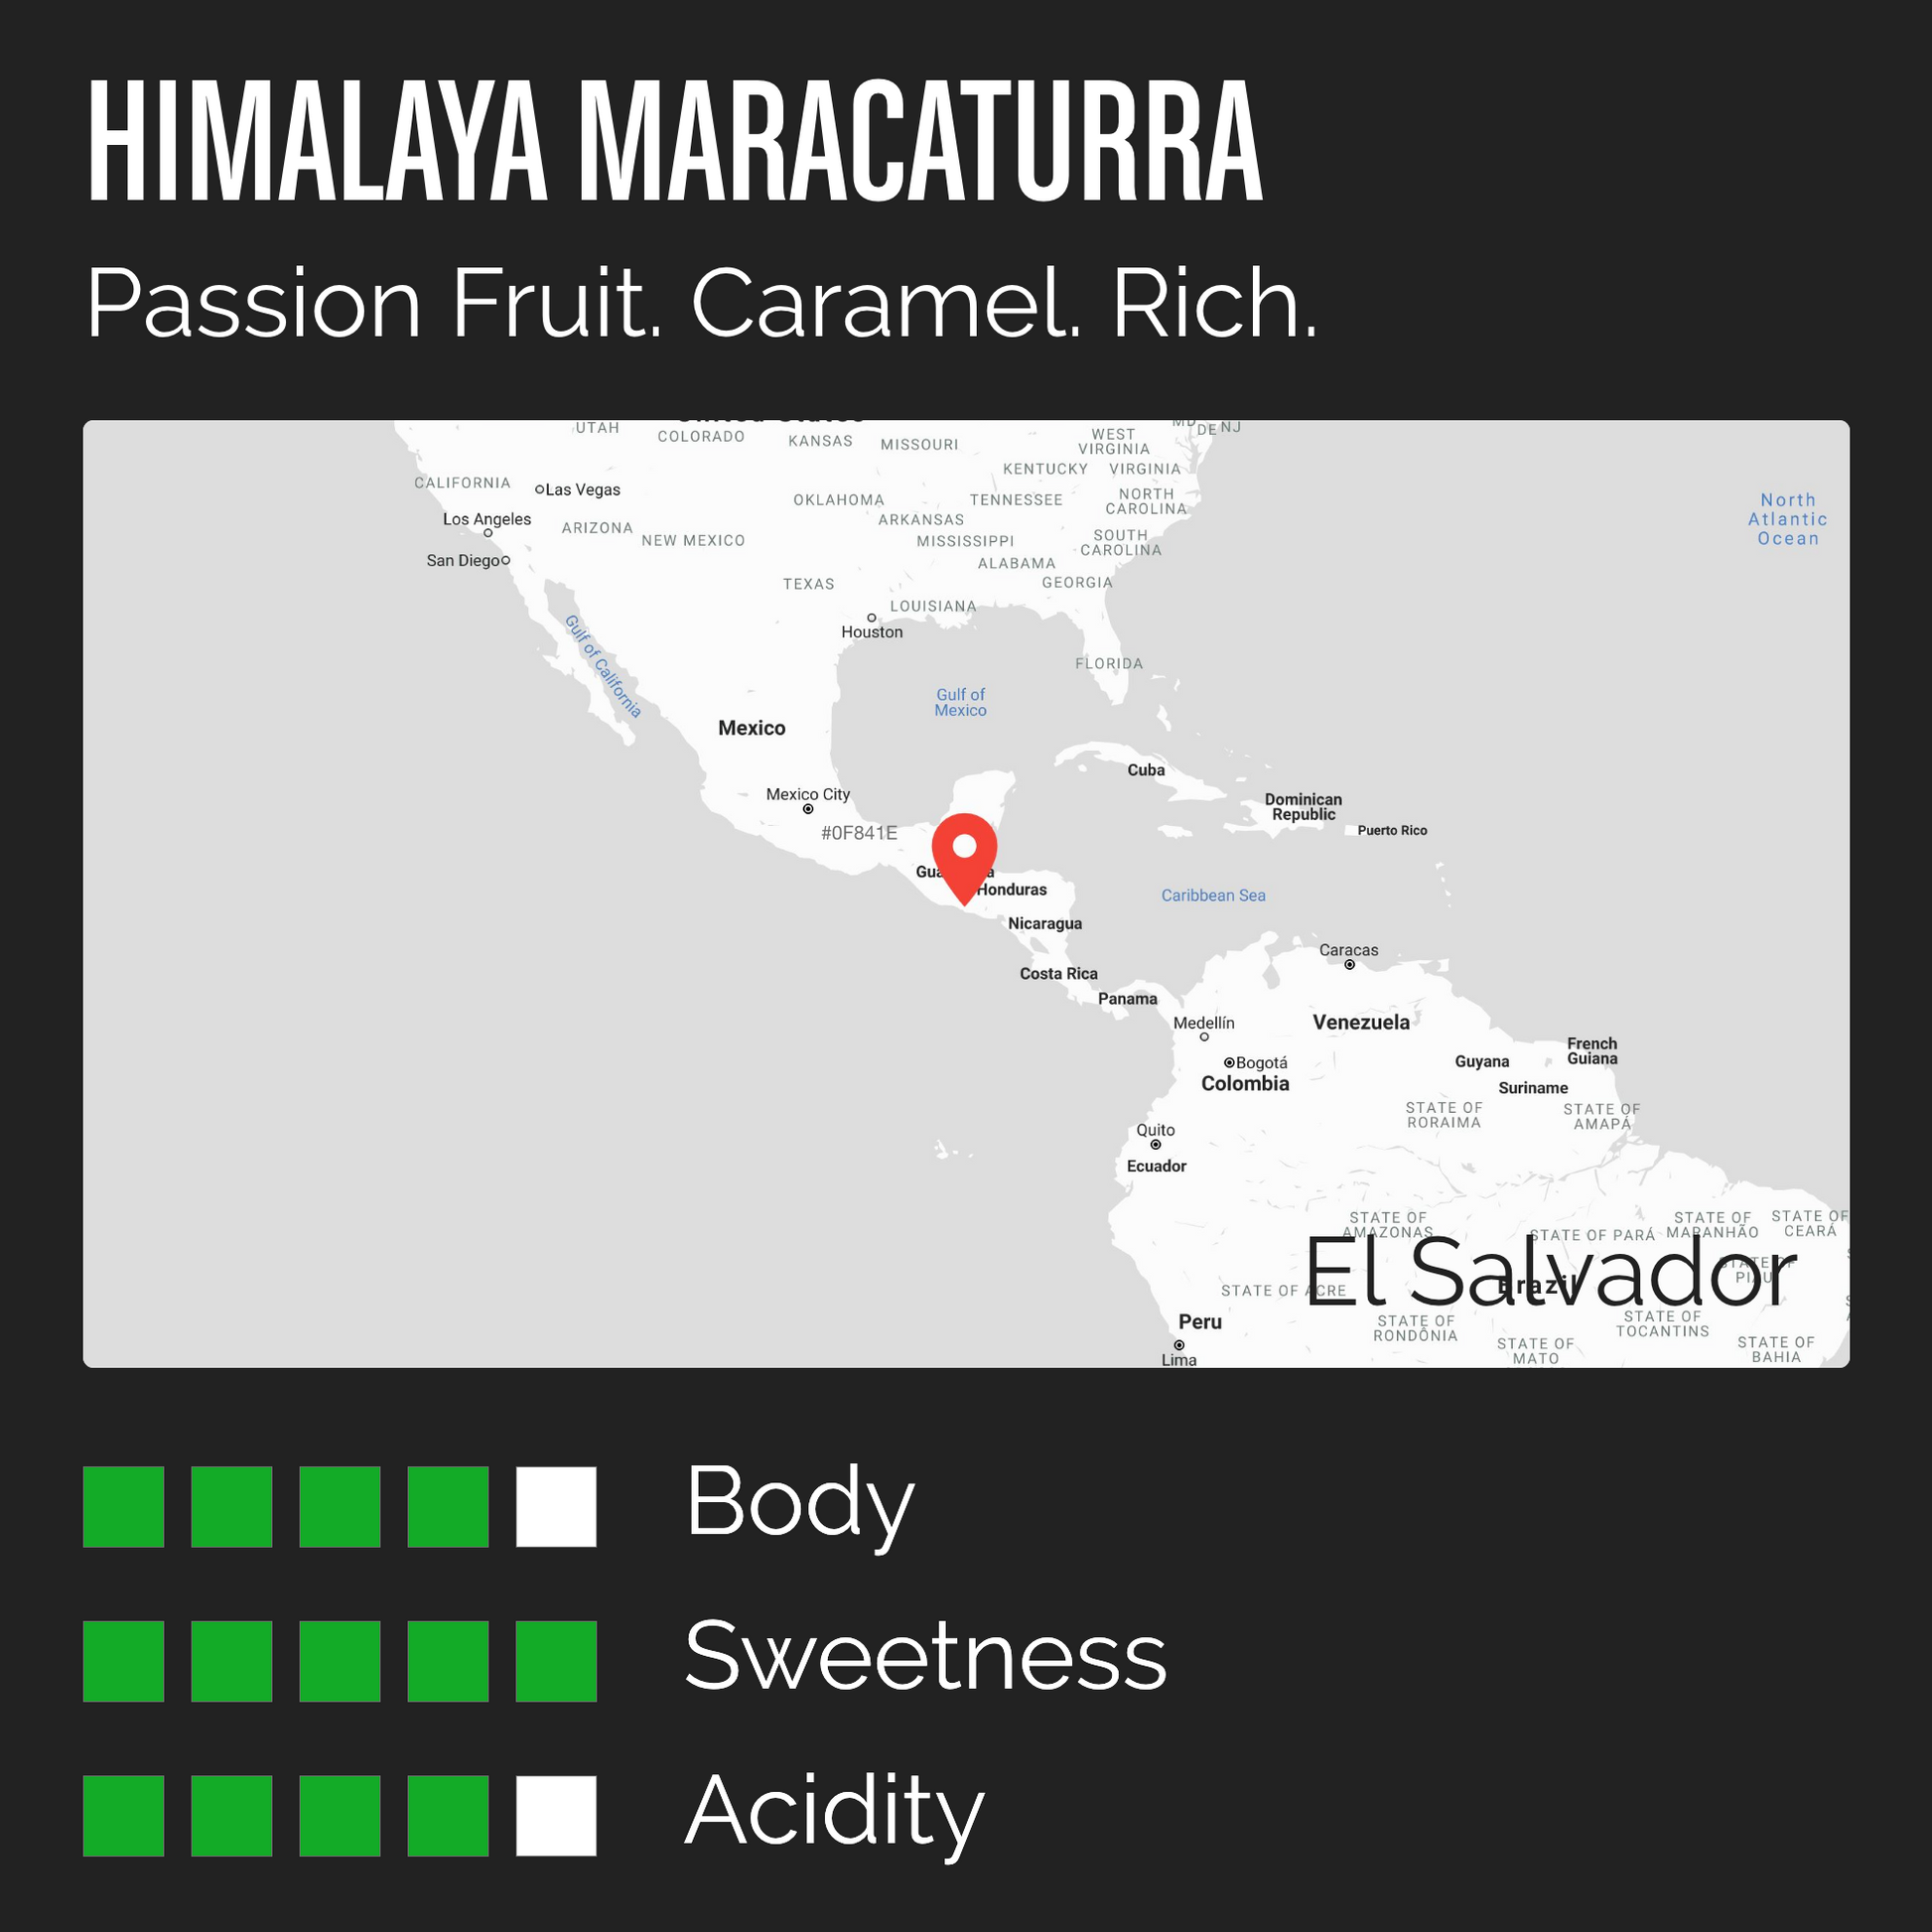 Himalaya Maracaturra info card with tasting notees: passion fruit, caramel, rich